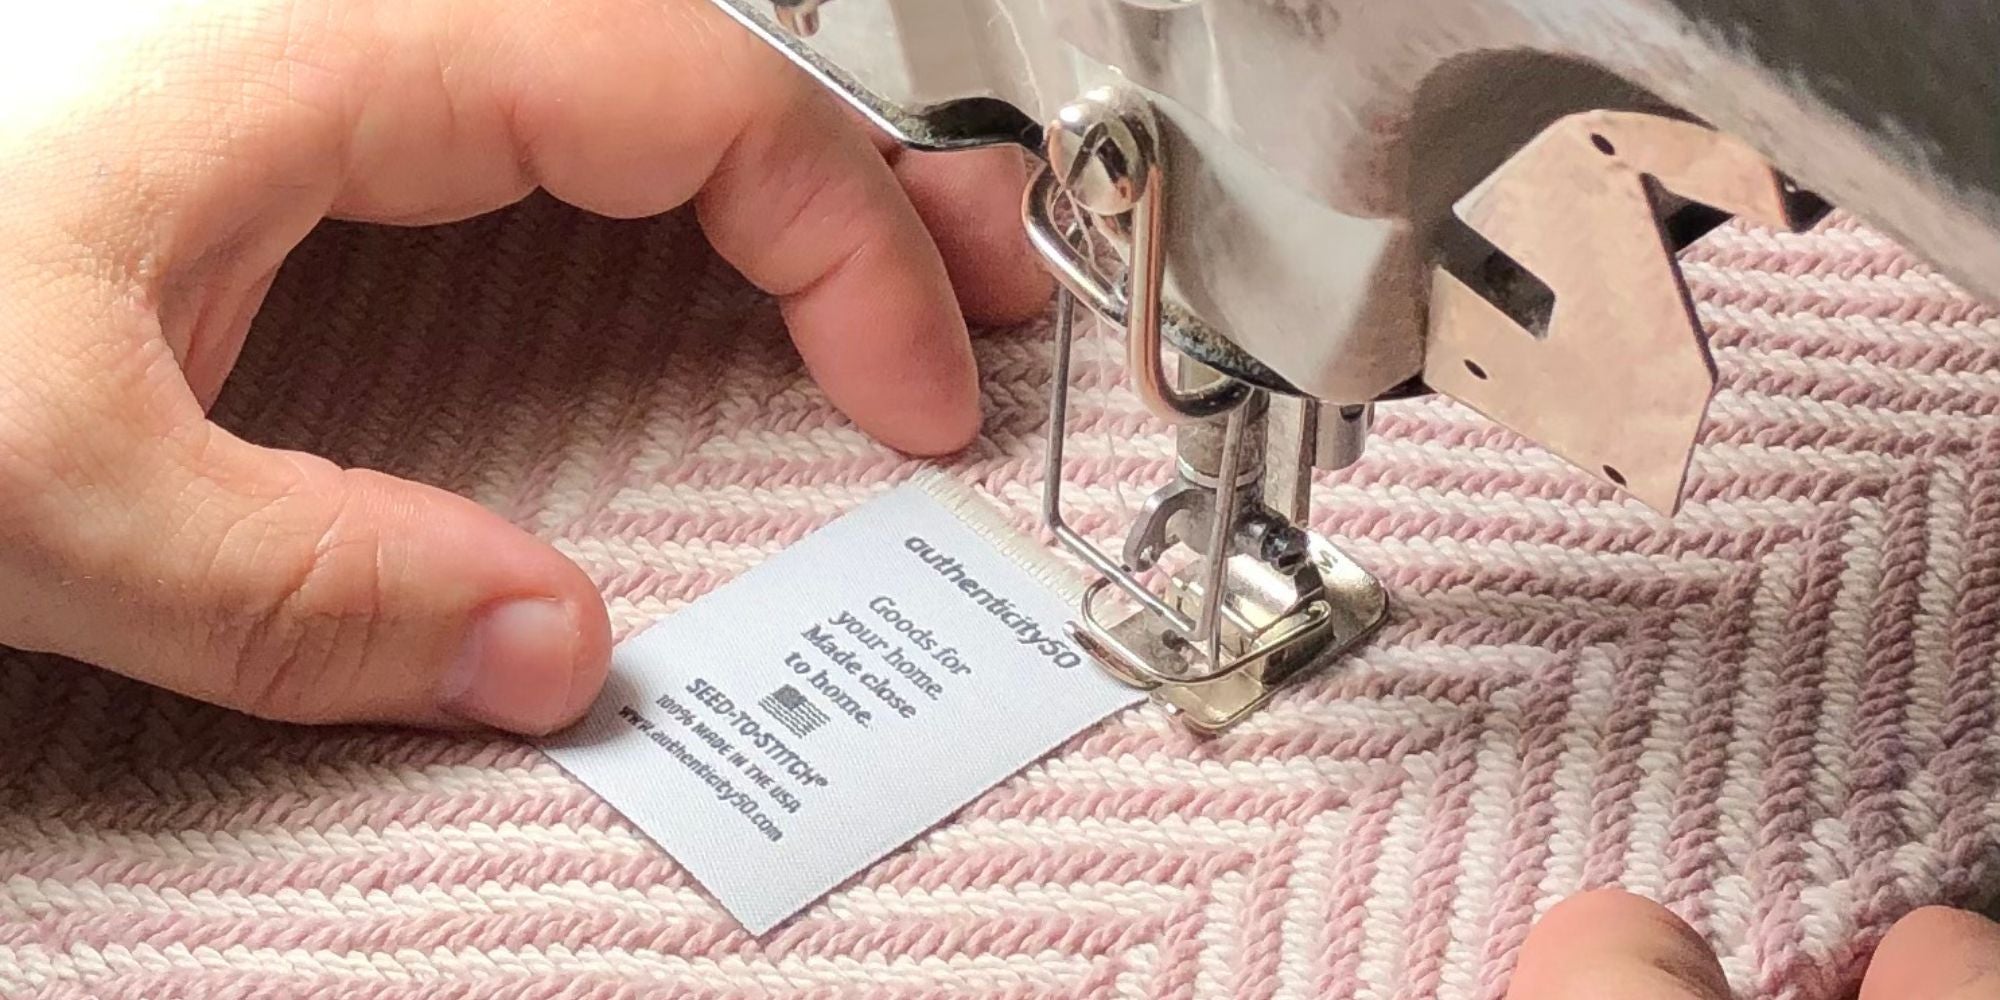 sewing a tag onto a blanket by hand